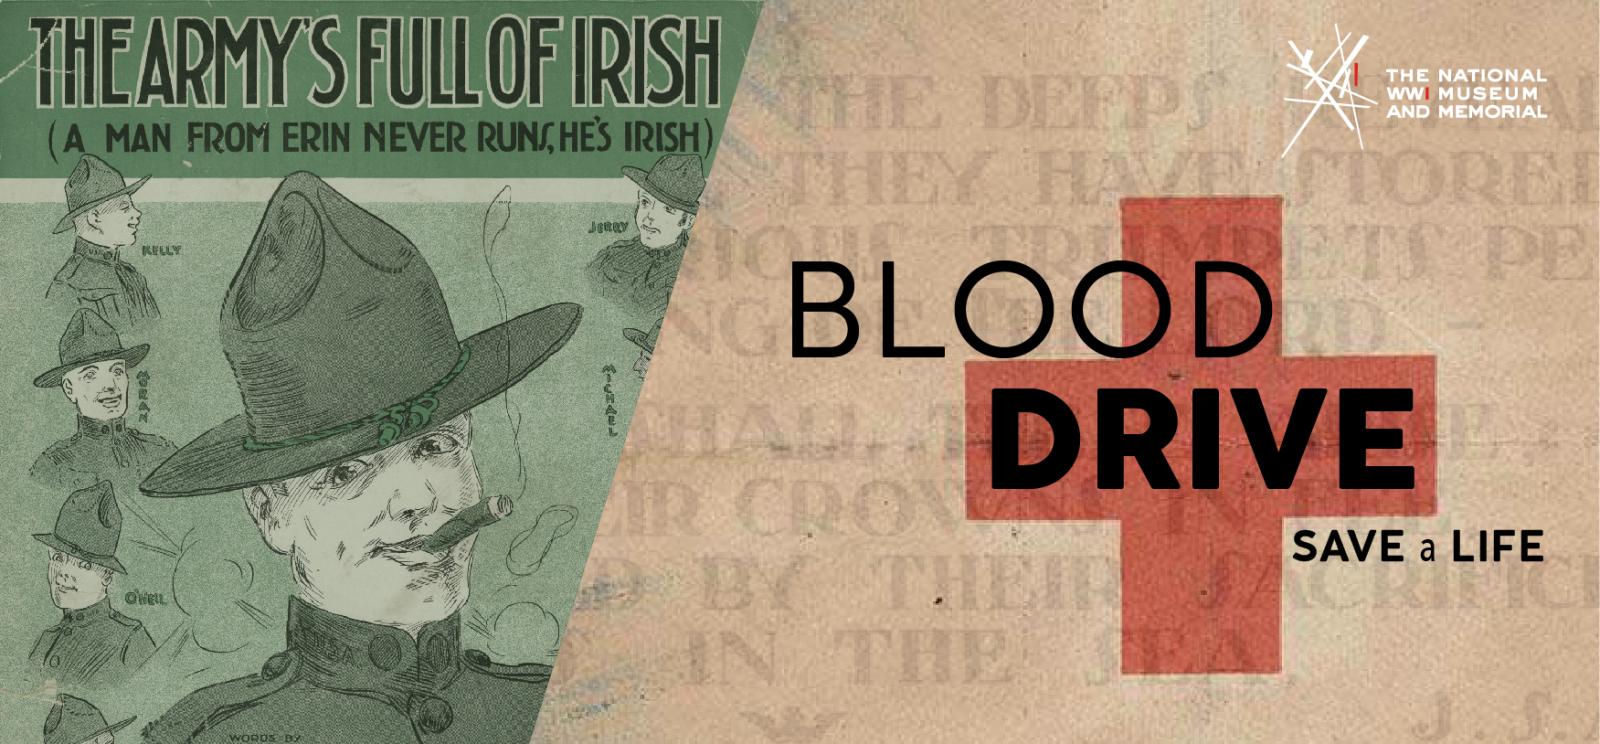 Images: On the left, a green-shaded drawing of a white man wearing a tall brimmed hat and WWI uniform smoking a cigar. On the right, the Red Cross logo. Text: Blood Drive / Save a Life